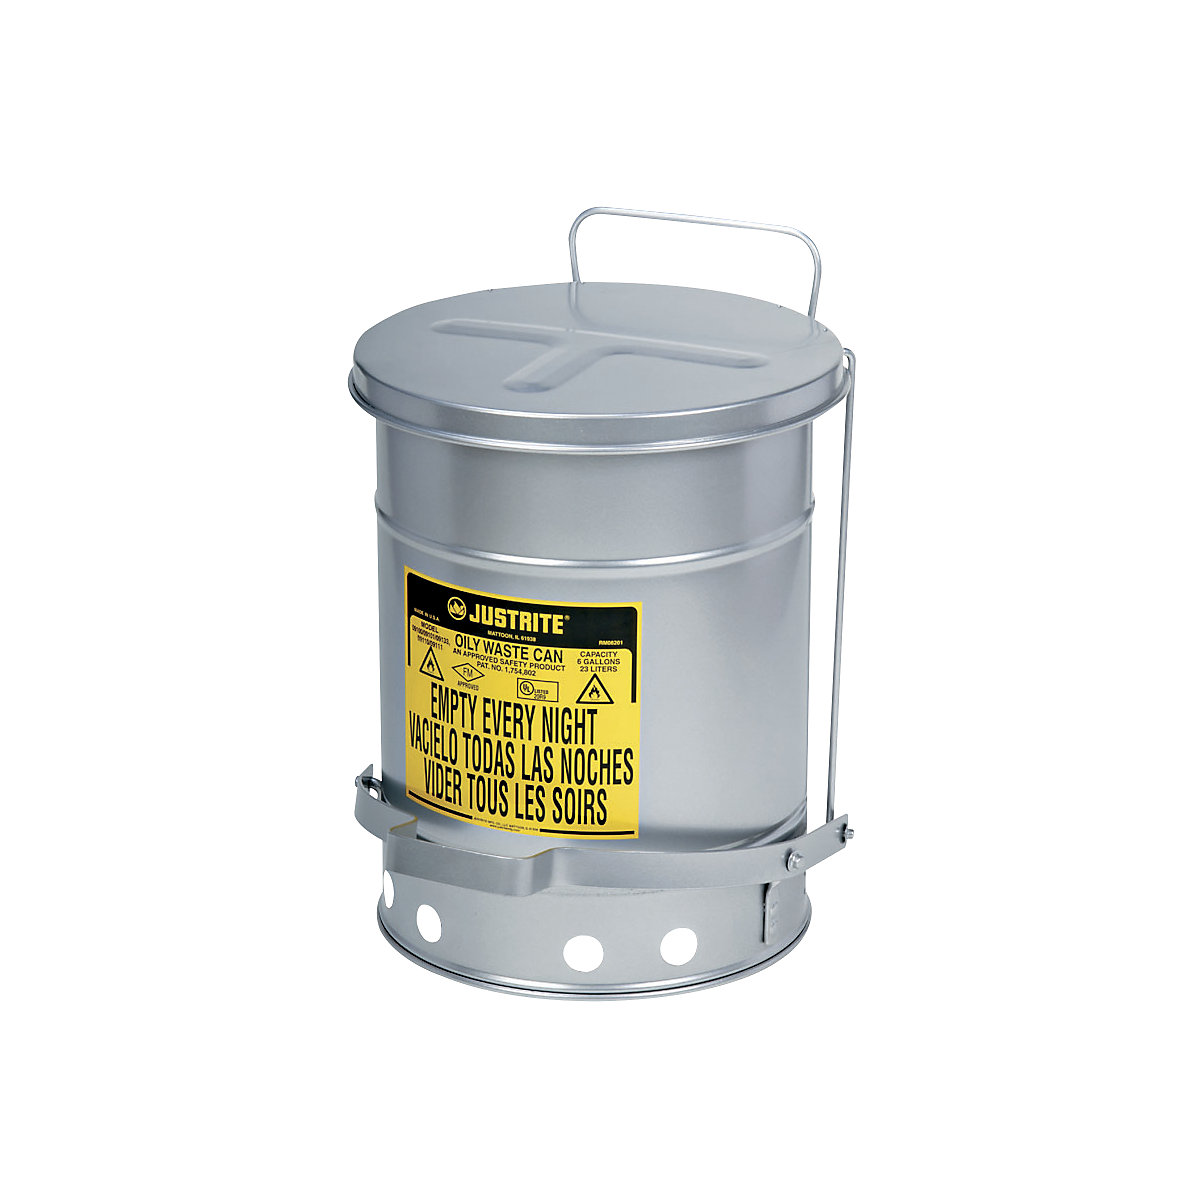 Low noise SoundGard™ safety disposal cans – Justrite